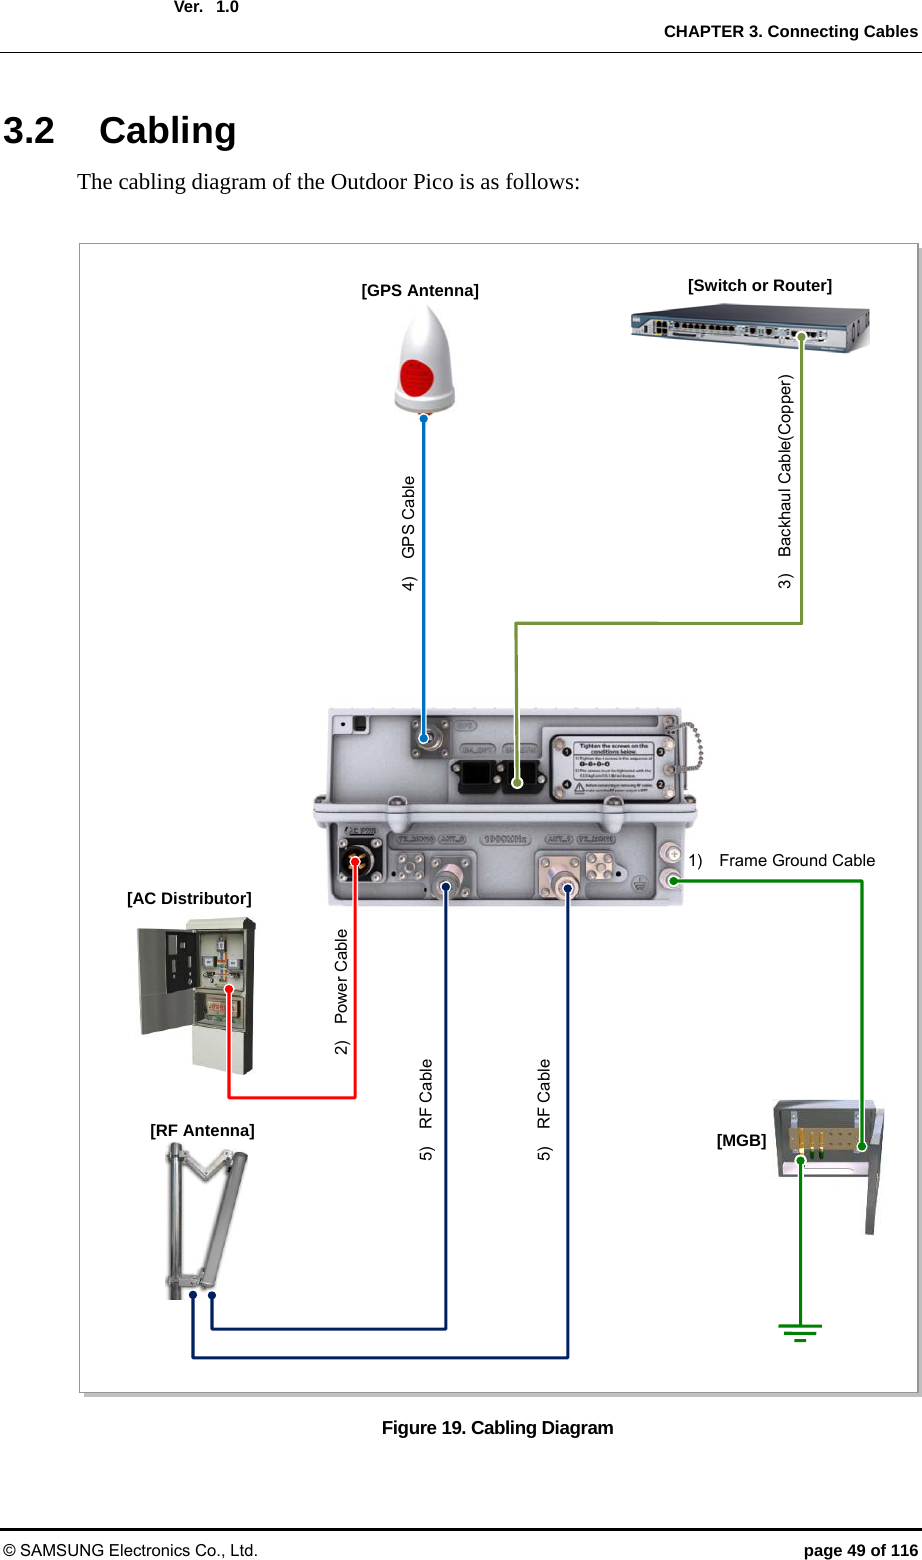  Ver.  CHAPTER 3. Connecting Cables © SAMSUNG Electronics Co., Ltd.  page 49 of 116 1.0 3.2 Cabling The cabling diagram of the Outdoor Pico is as follows:  Figure 19. Cabling Diagram  5)  RF Cable [AC Distributor] [MGB] [RF Antenna] 1)  Frame Ground Cable[GPS Antenna]  [Switch or Router] 2)  Power Cable 3)  Backhaul Cable(Copper) 4)  GPS Cable 5)  RF Cable 